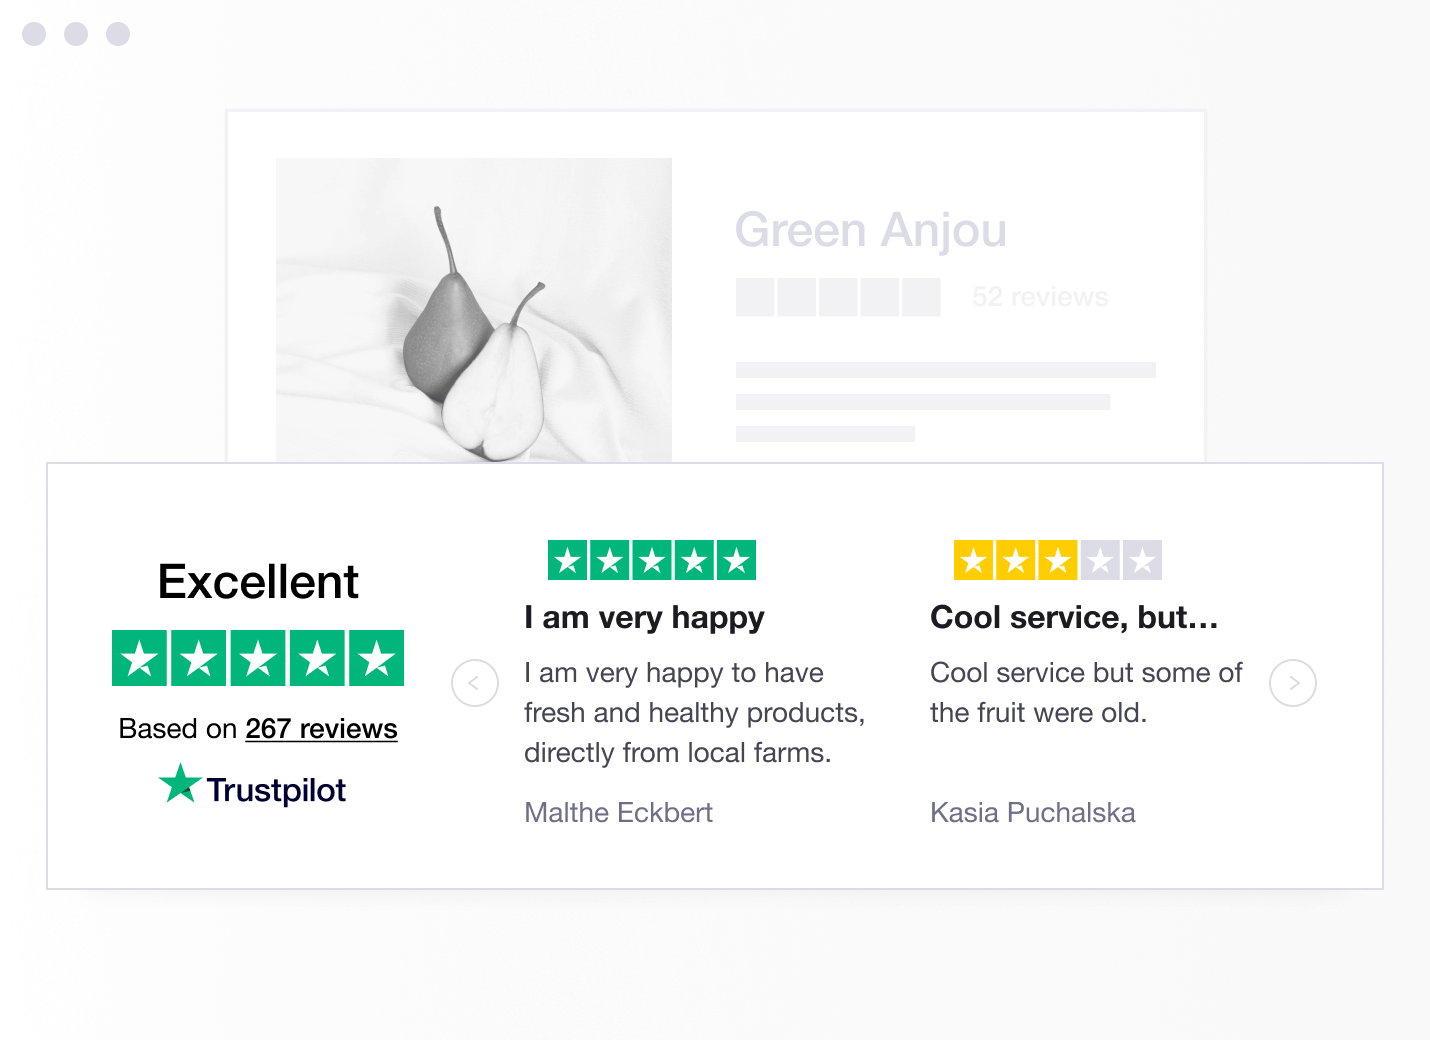 Trustpilot - customer reviews with different rating